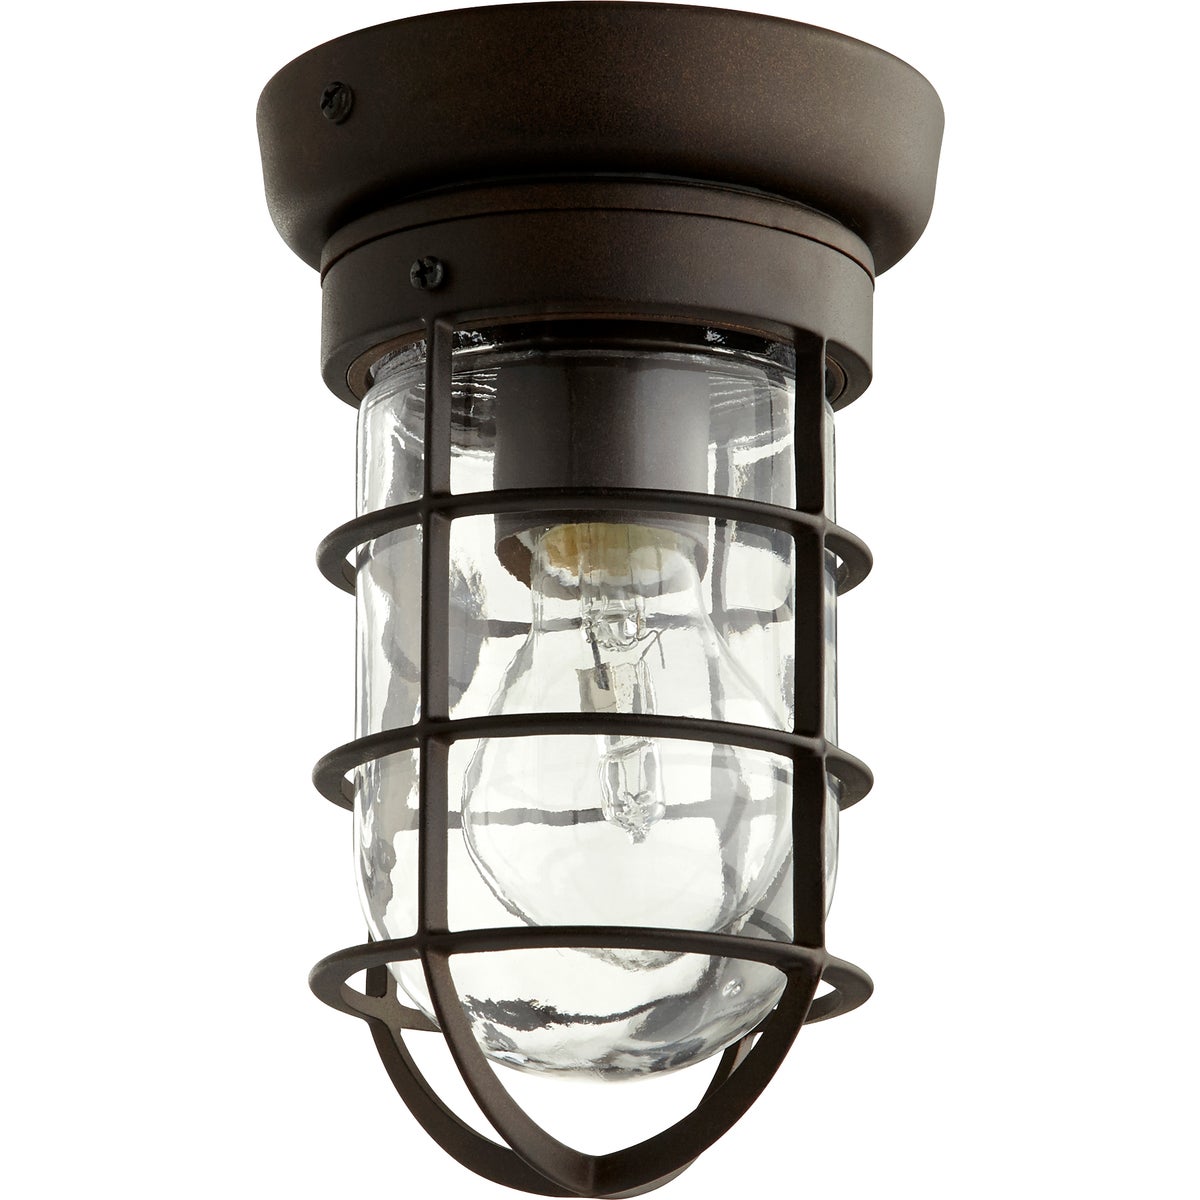 Coastal outdoor ceiling light with clear glass shade and cage enclosure, perfect for coastal and rustic outdoor settings. Adds exceptional style and welcoming light to home exteriors. Install on porch, deck, or balcony for eye-catching illumination. Quorum International brand. 60W, 120V, UL Listed, wet location safety rating. Dimensions: 4.5"W x 8.25"H. 2-year warranty.